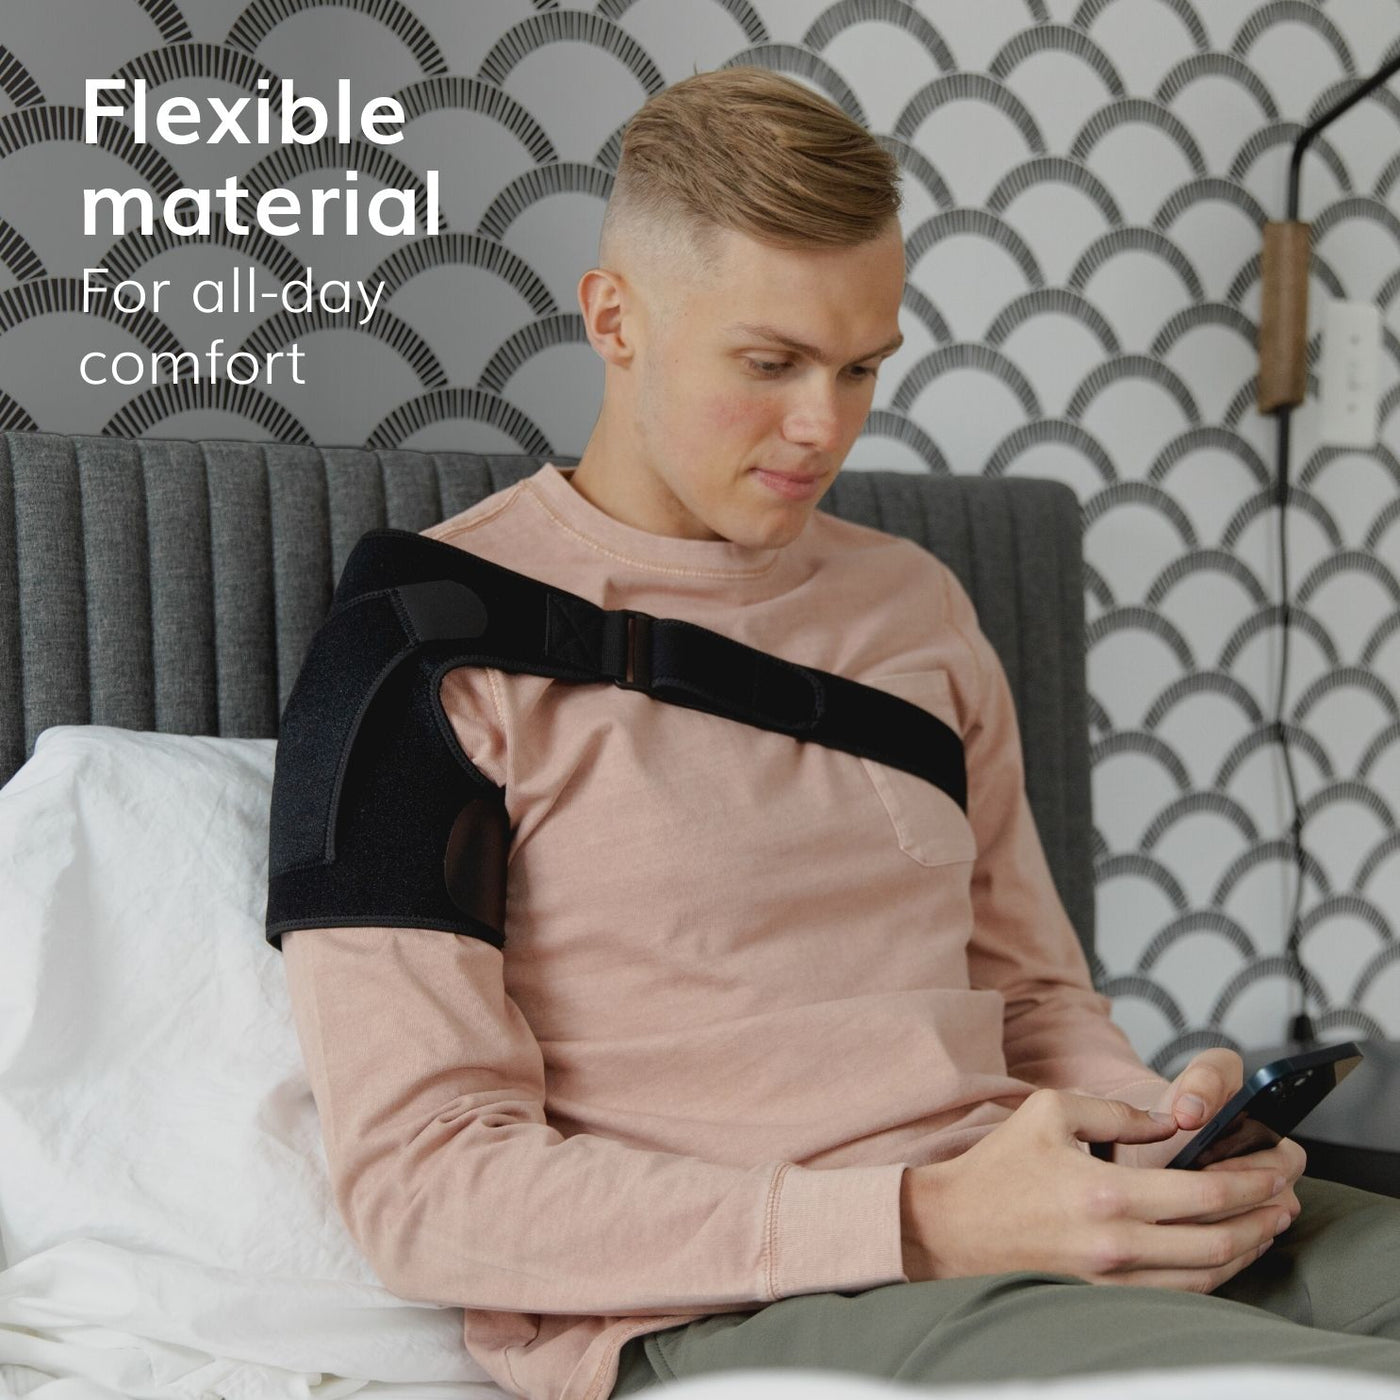 The shoulder sleeve compression brace for shoulder posture is made with flexible materials for all-day comfort